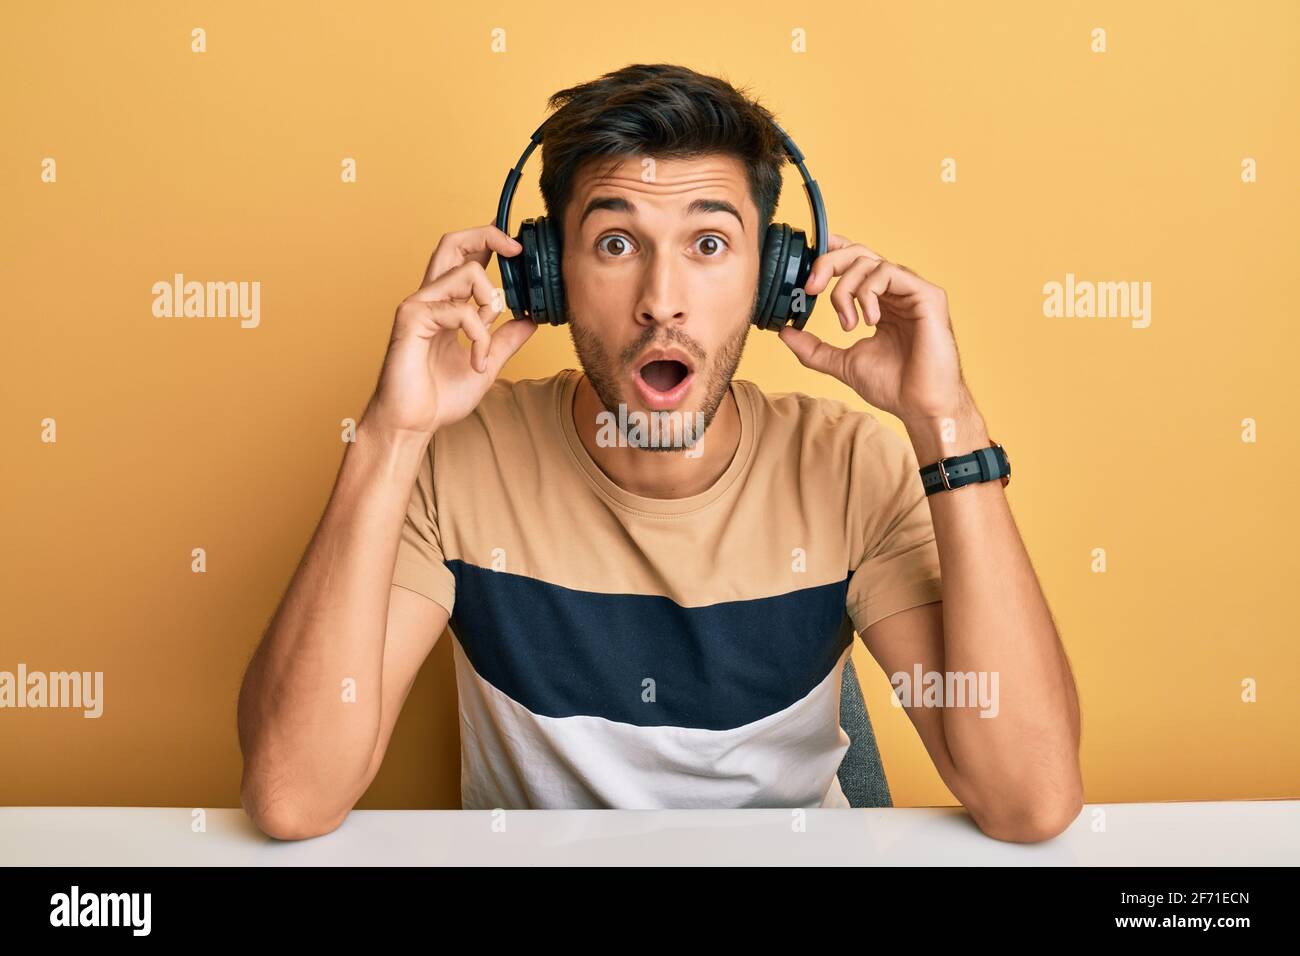 Young handsome man listening to music wearing headphones afraid and shocked with surprise and amazed expression, fear and excited face. Stock Photo